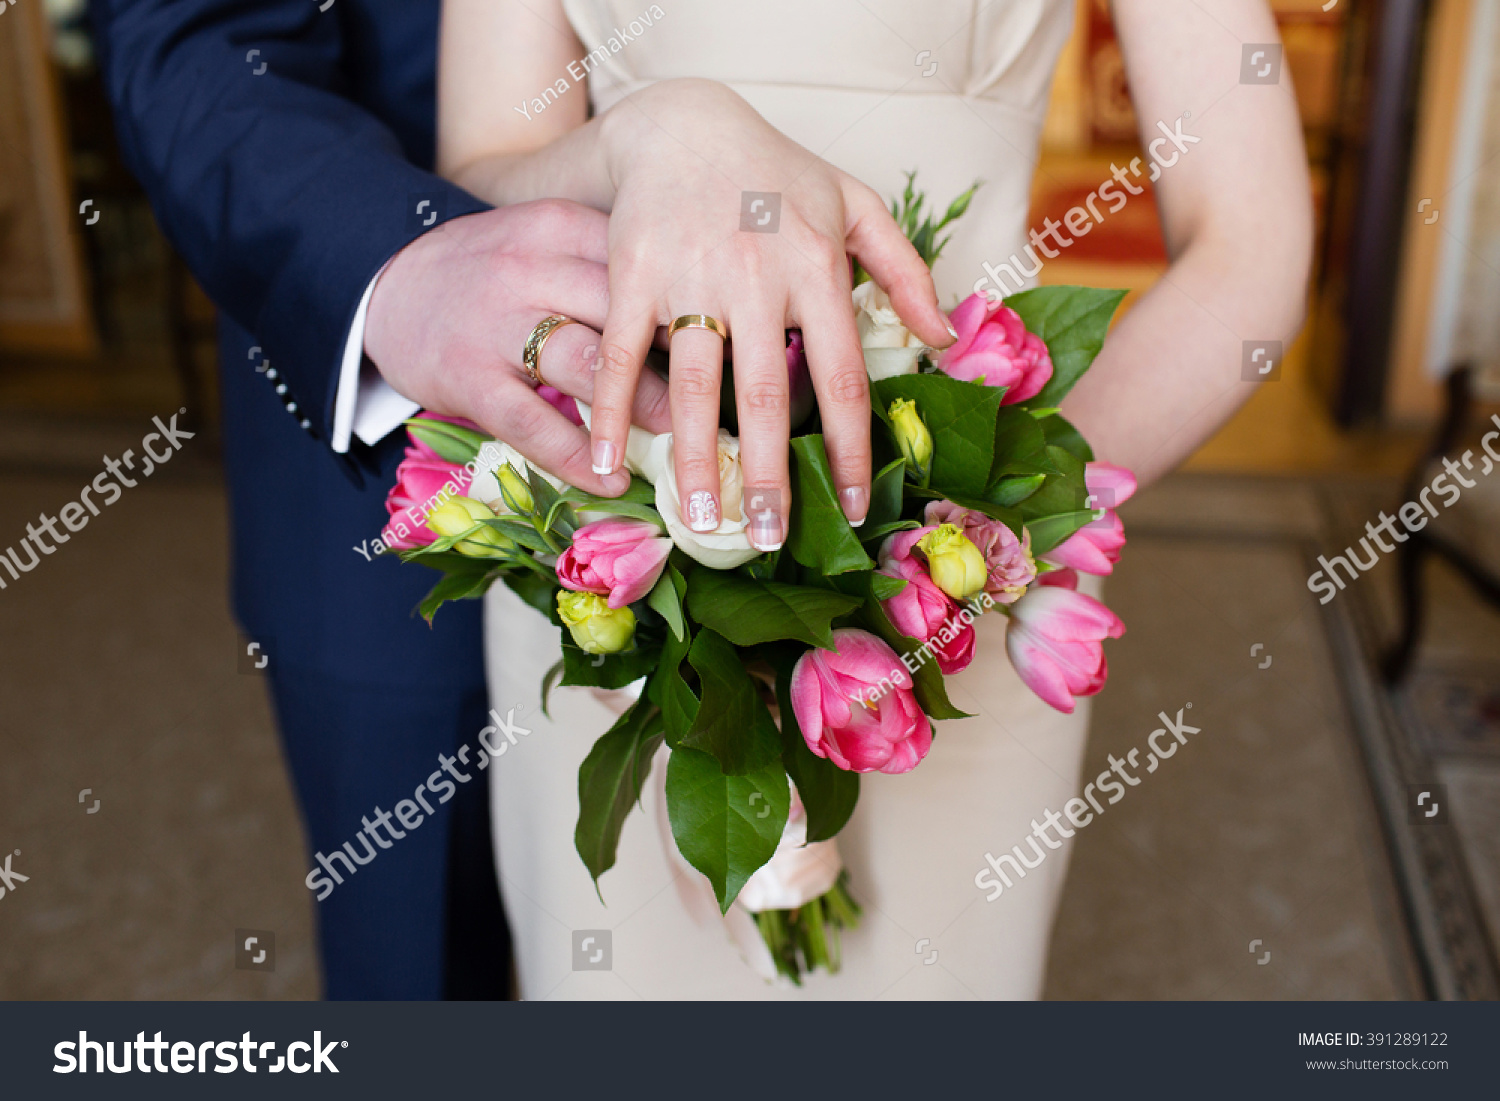 Hands of the groom and bride with rings and bridal bouquet #391289122